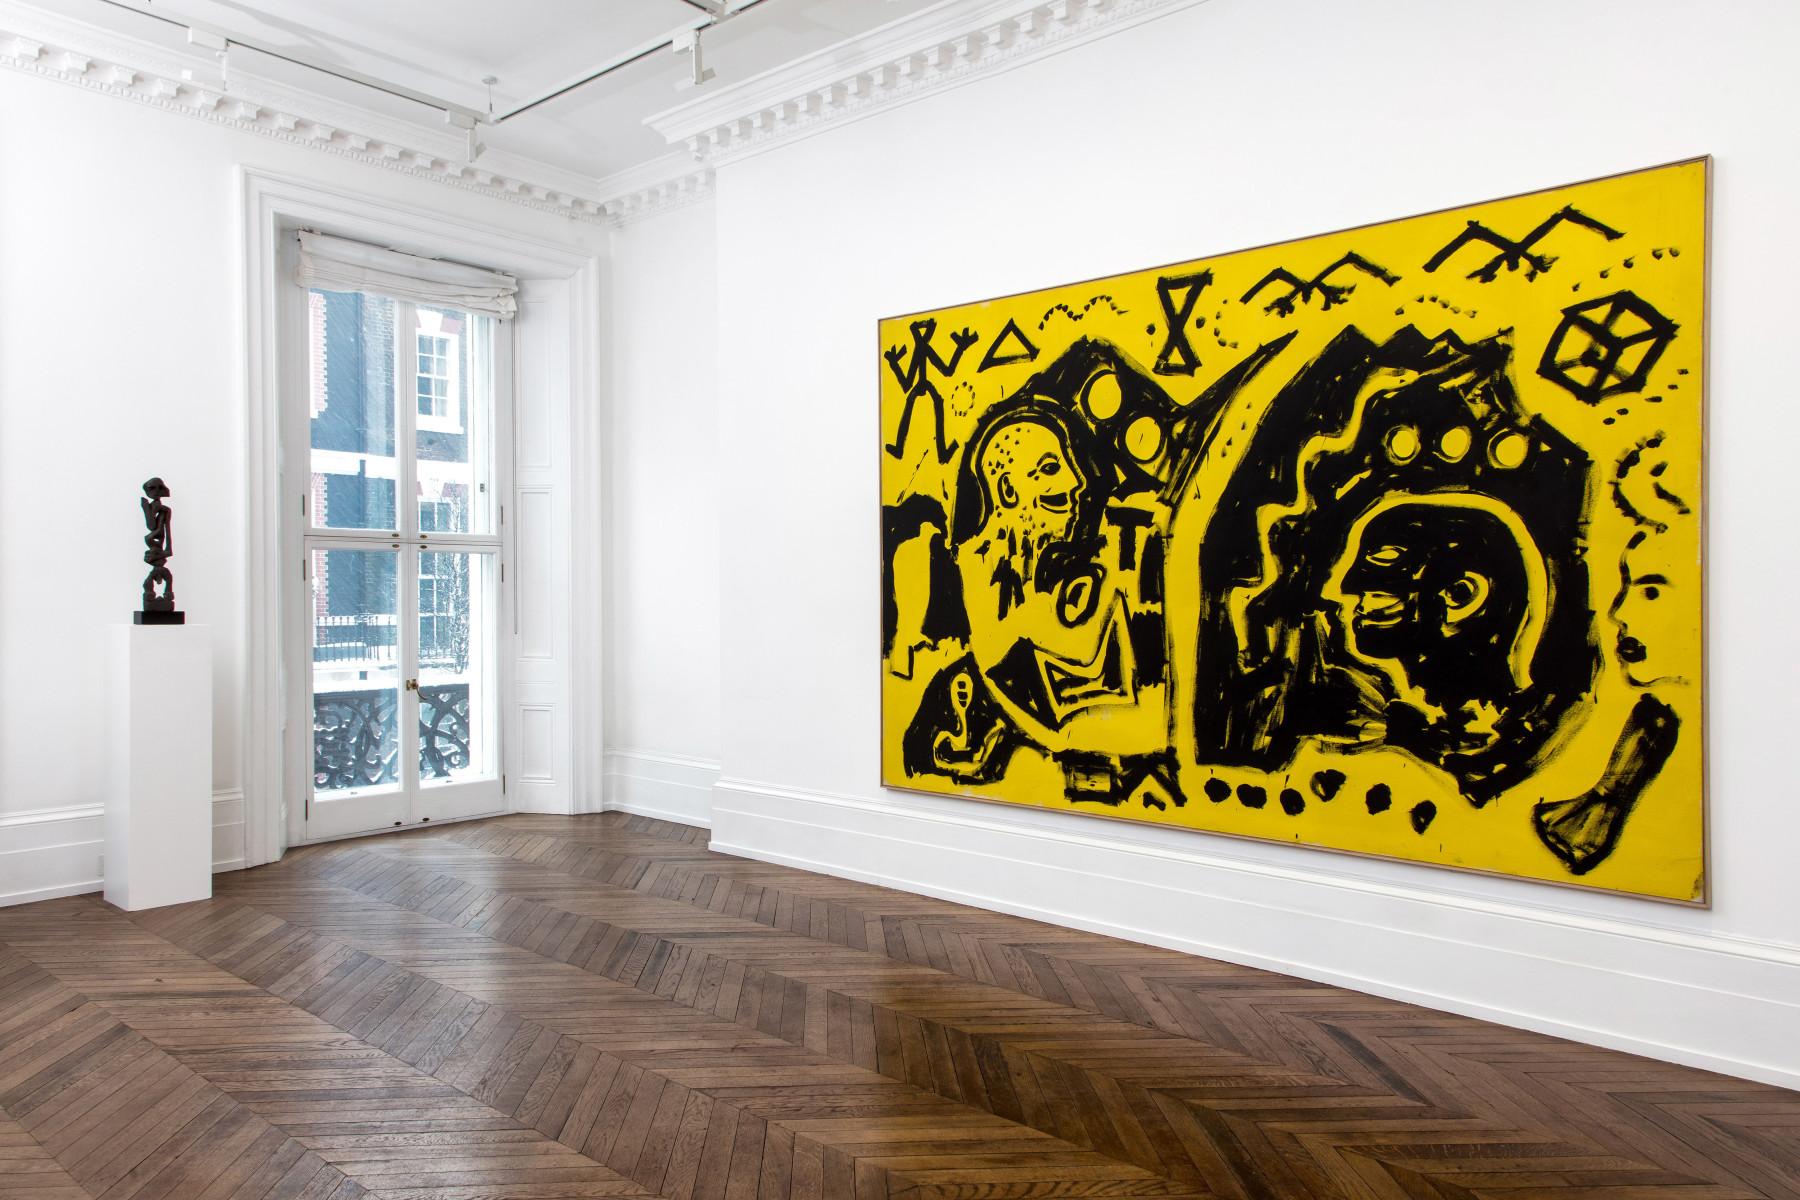 A.R. PENCK, Paintings from the 1980s and Memorial to an Unknown East German Soldier, London, 2018, Installation Image 3